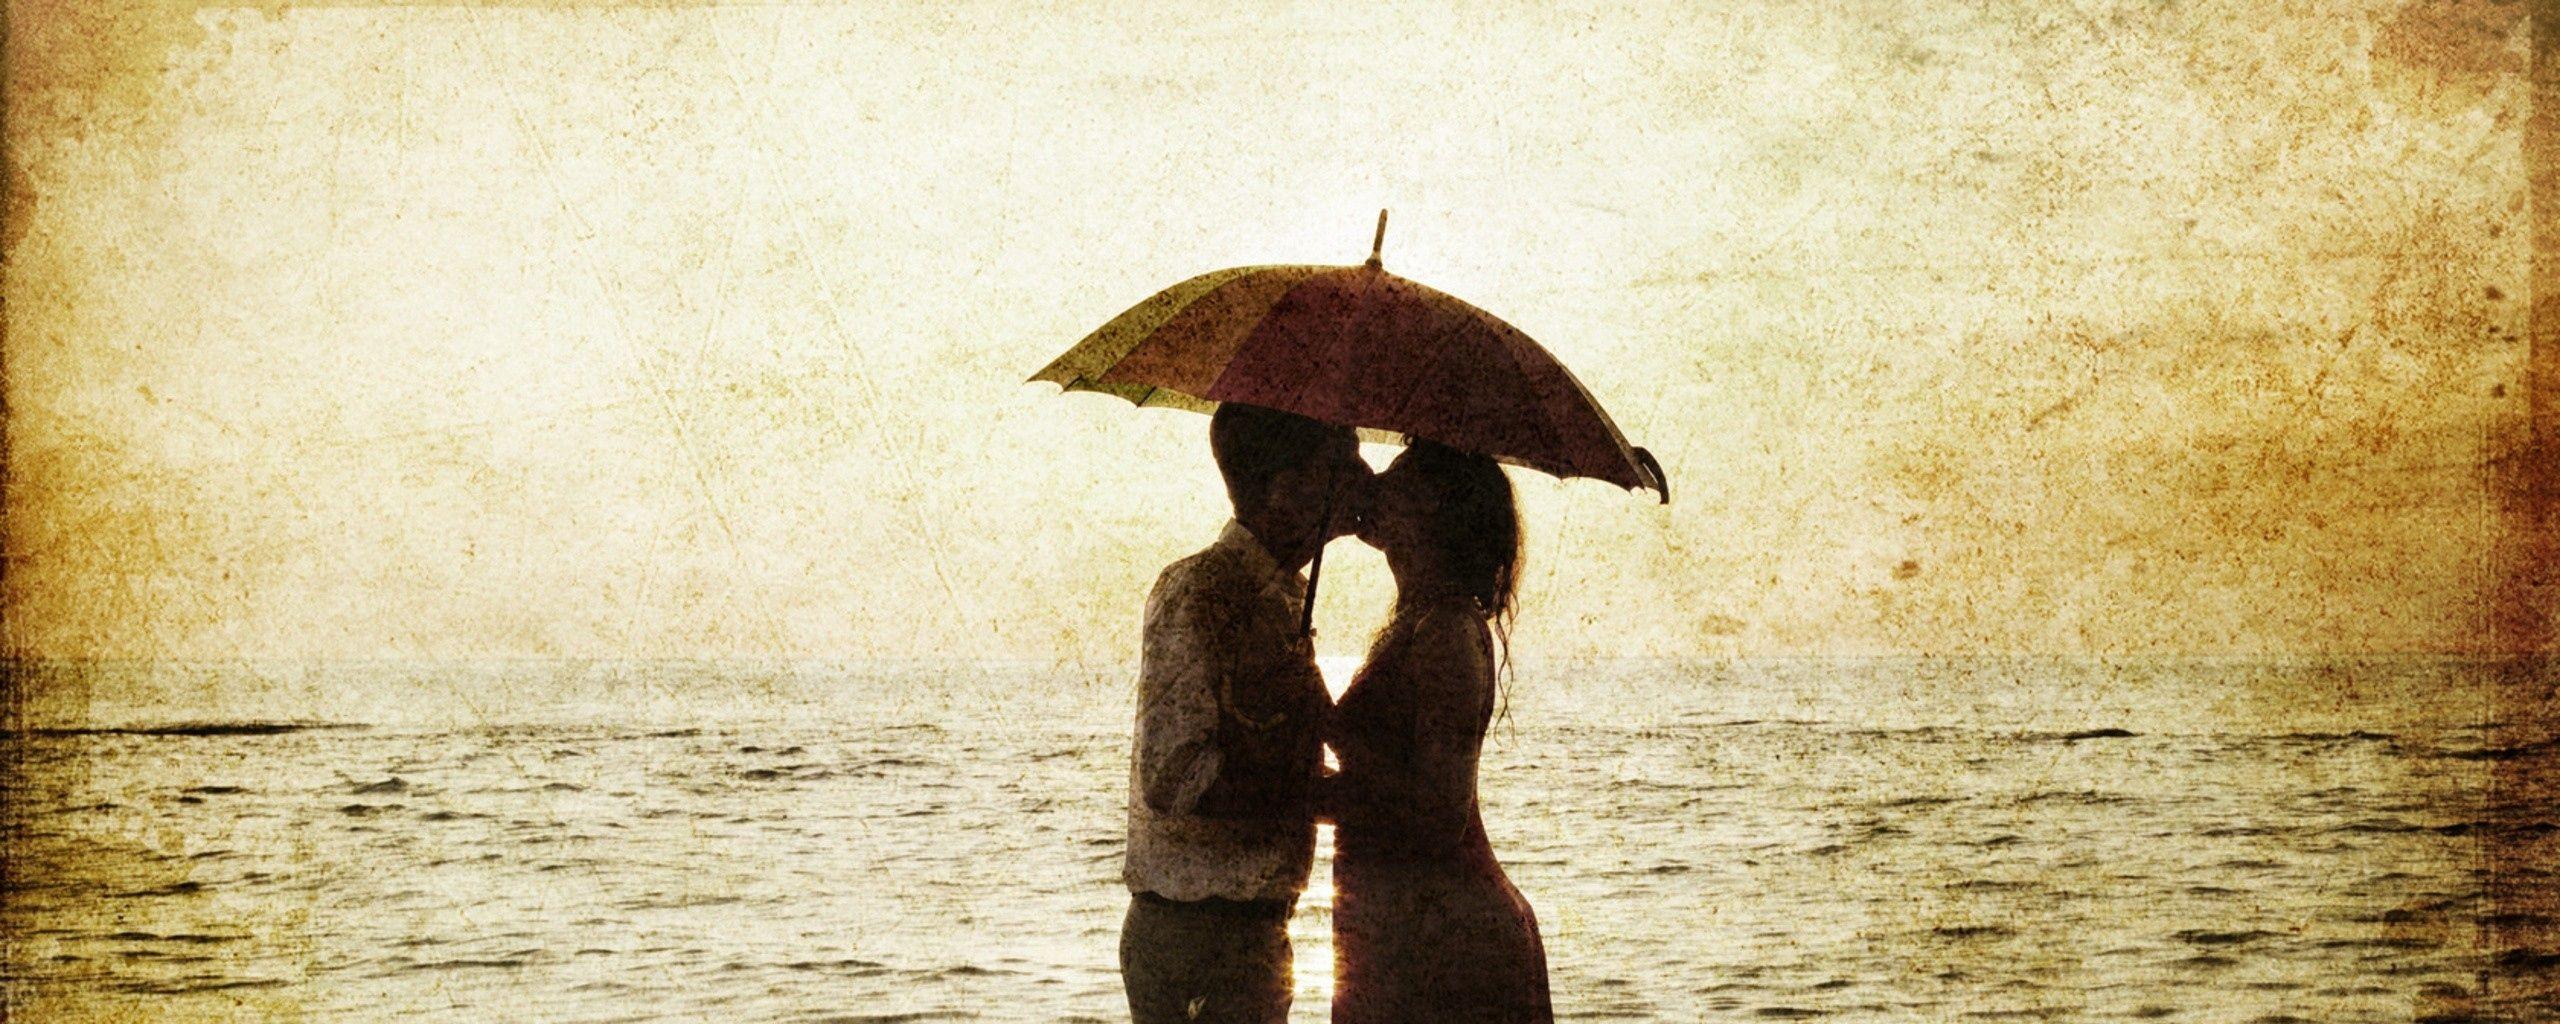 Wallpapers Of Love And Romance In Rain - Wallpaper Cave